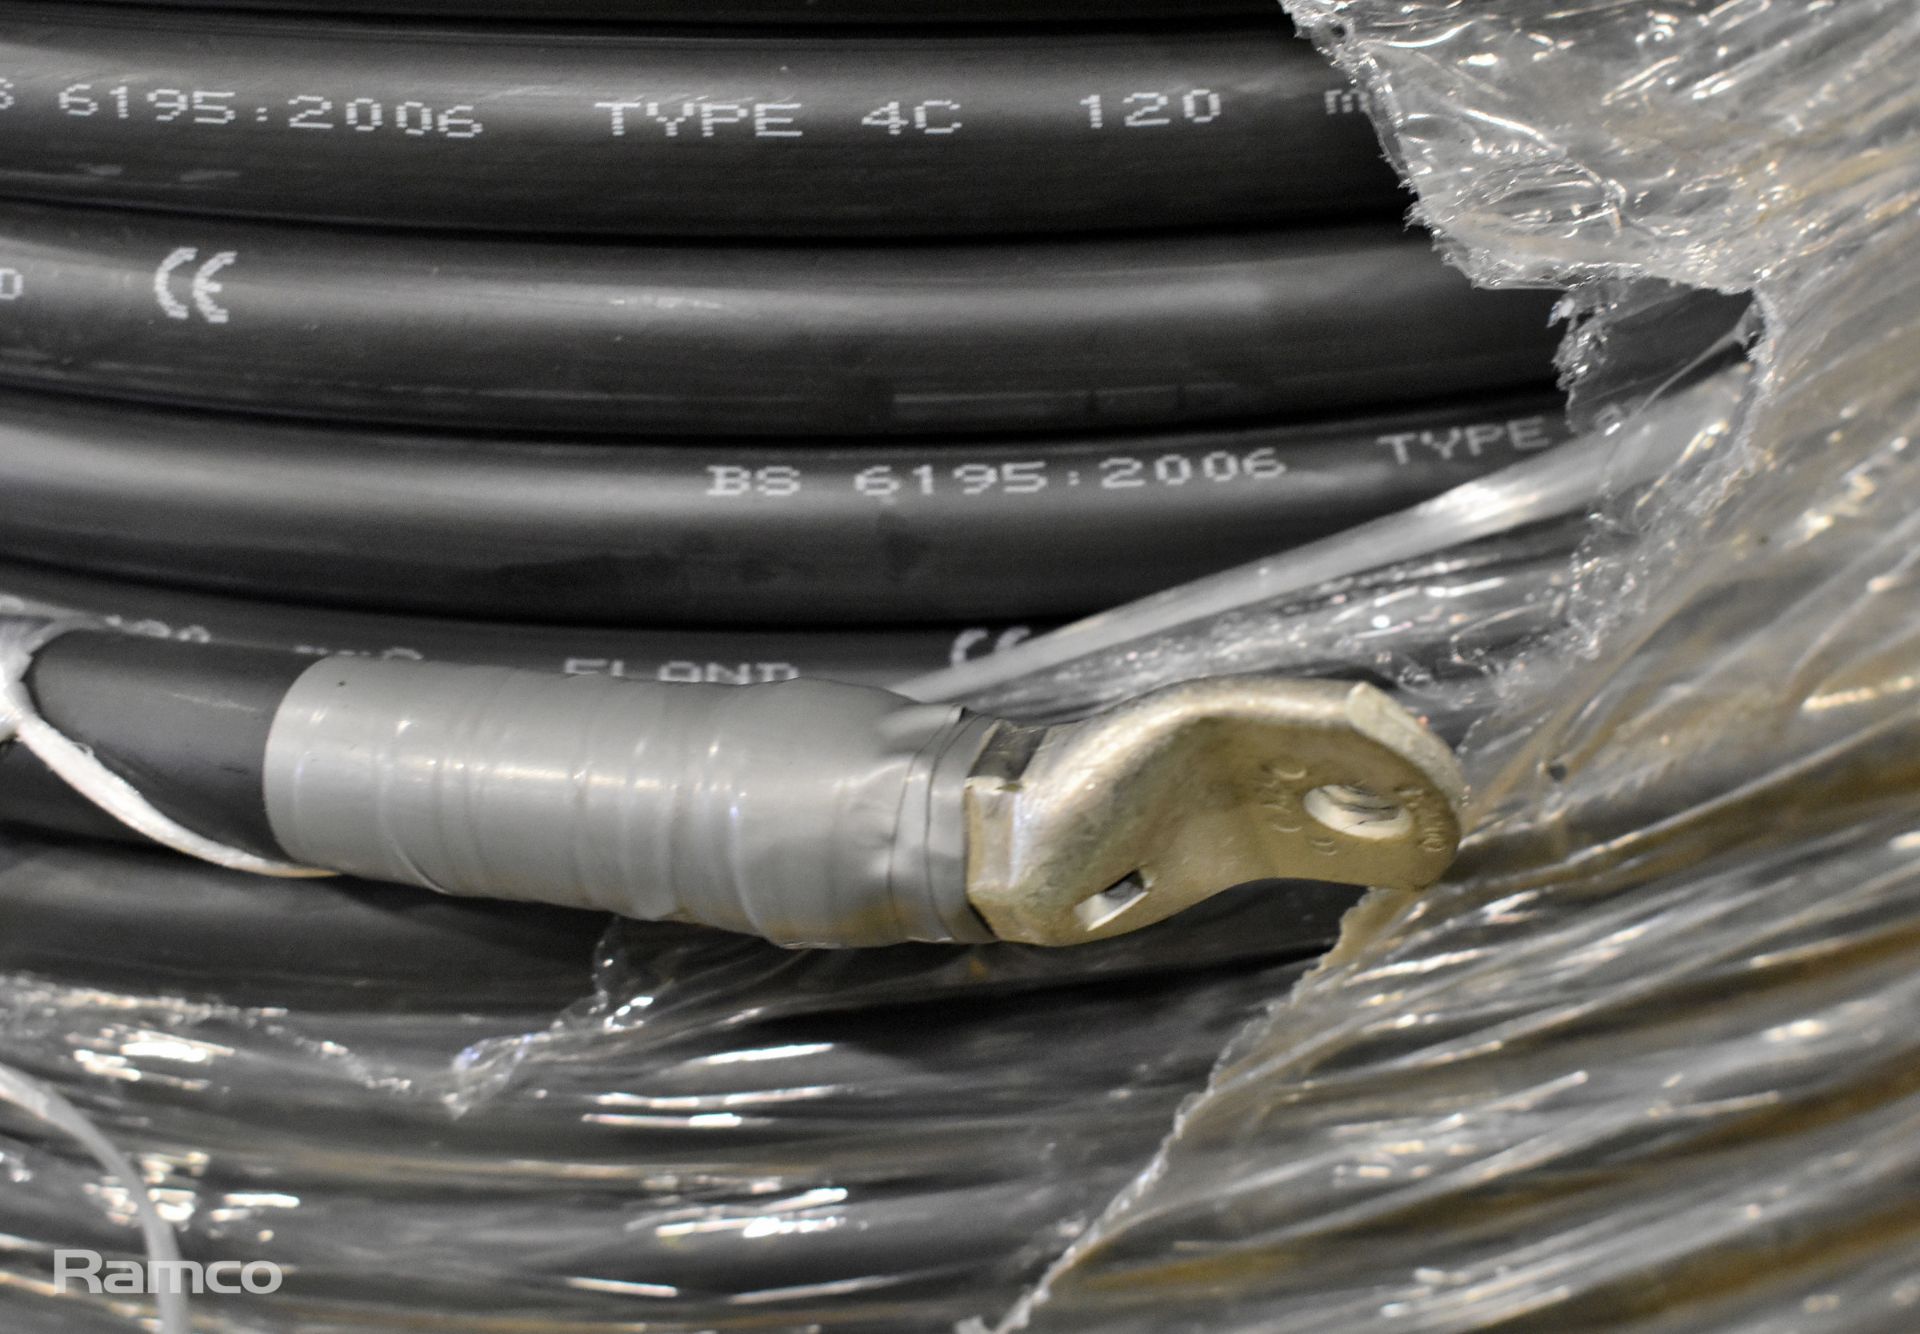 Eland Coil lead type 4C 120mm2 cable - approx length 150m - Image 2 of 3